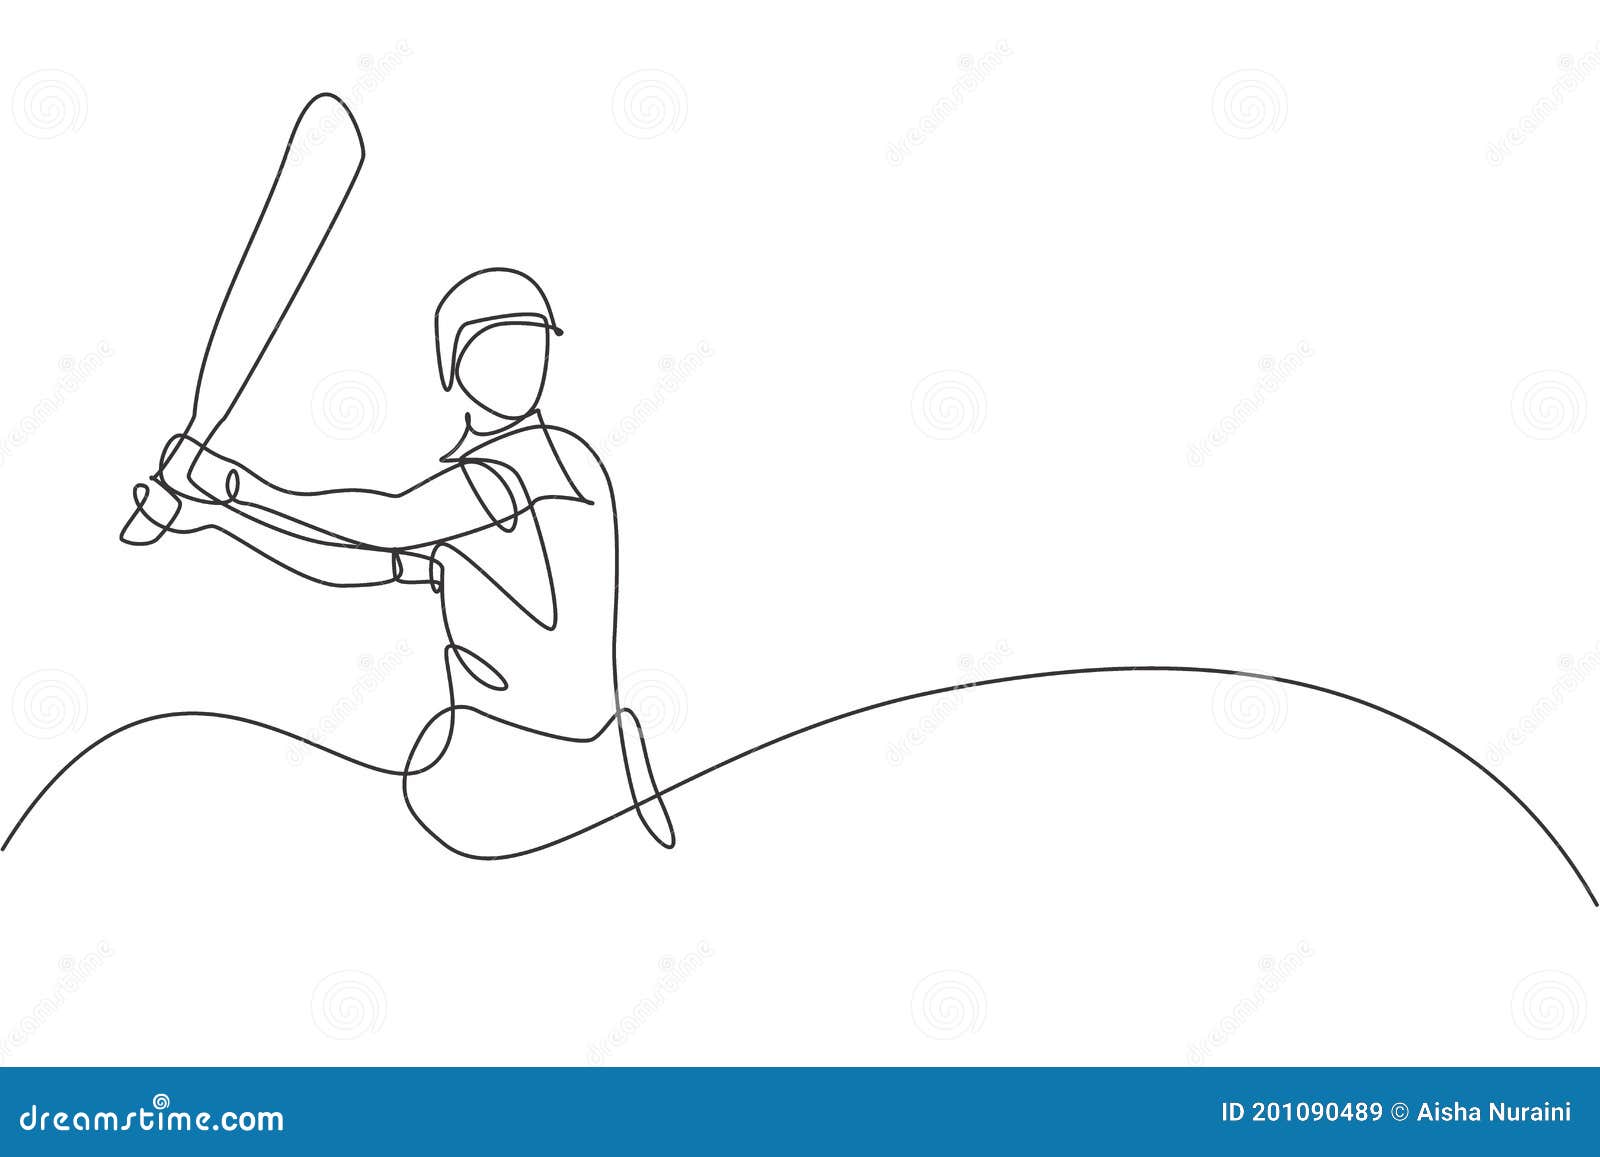 One Single Line Drawing Of Young Energetic Man Cricket Player Stance At